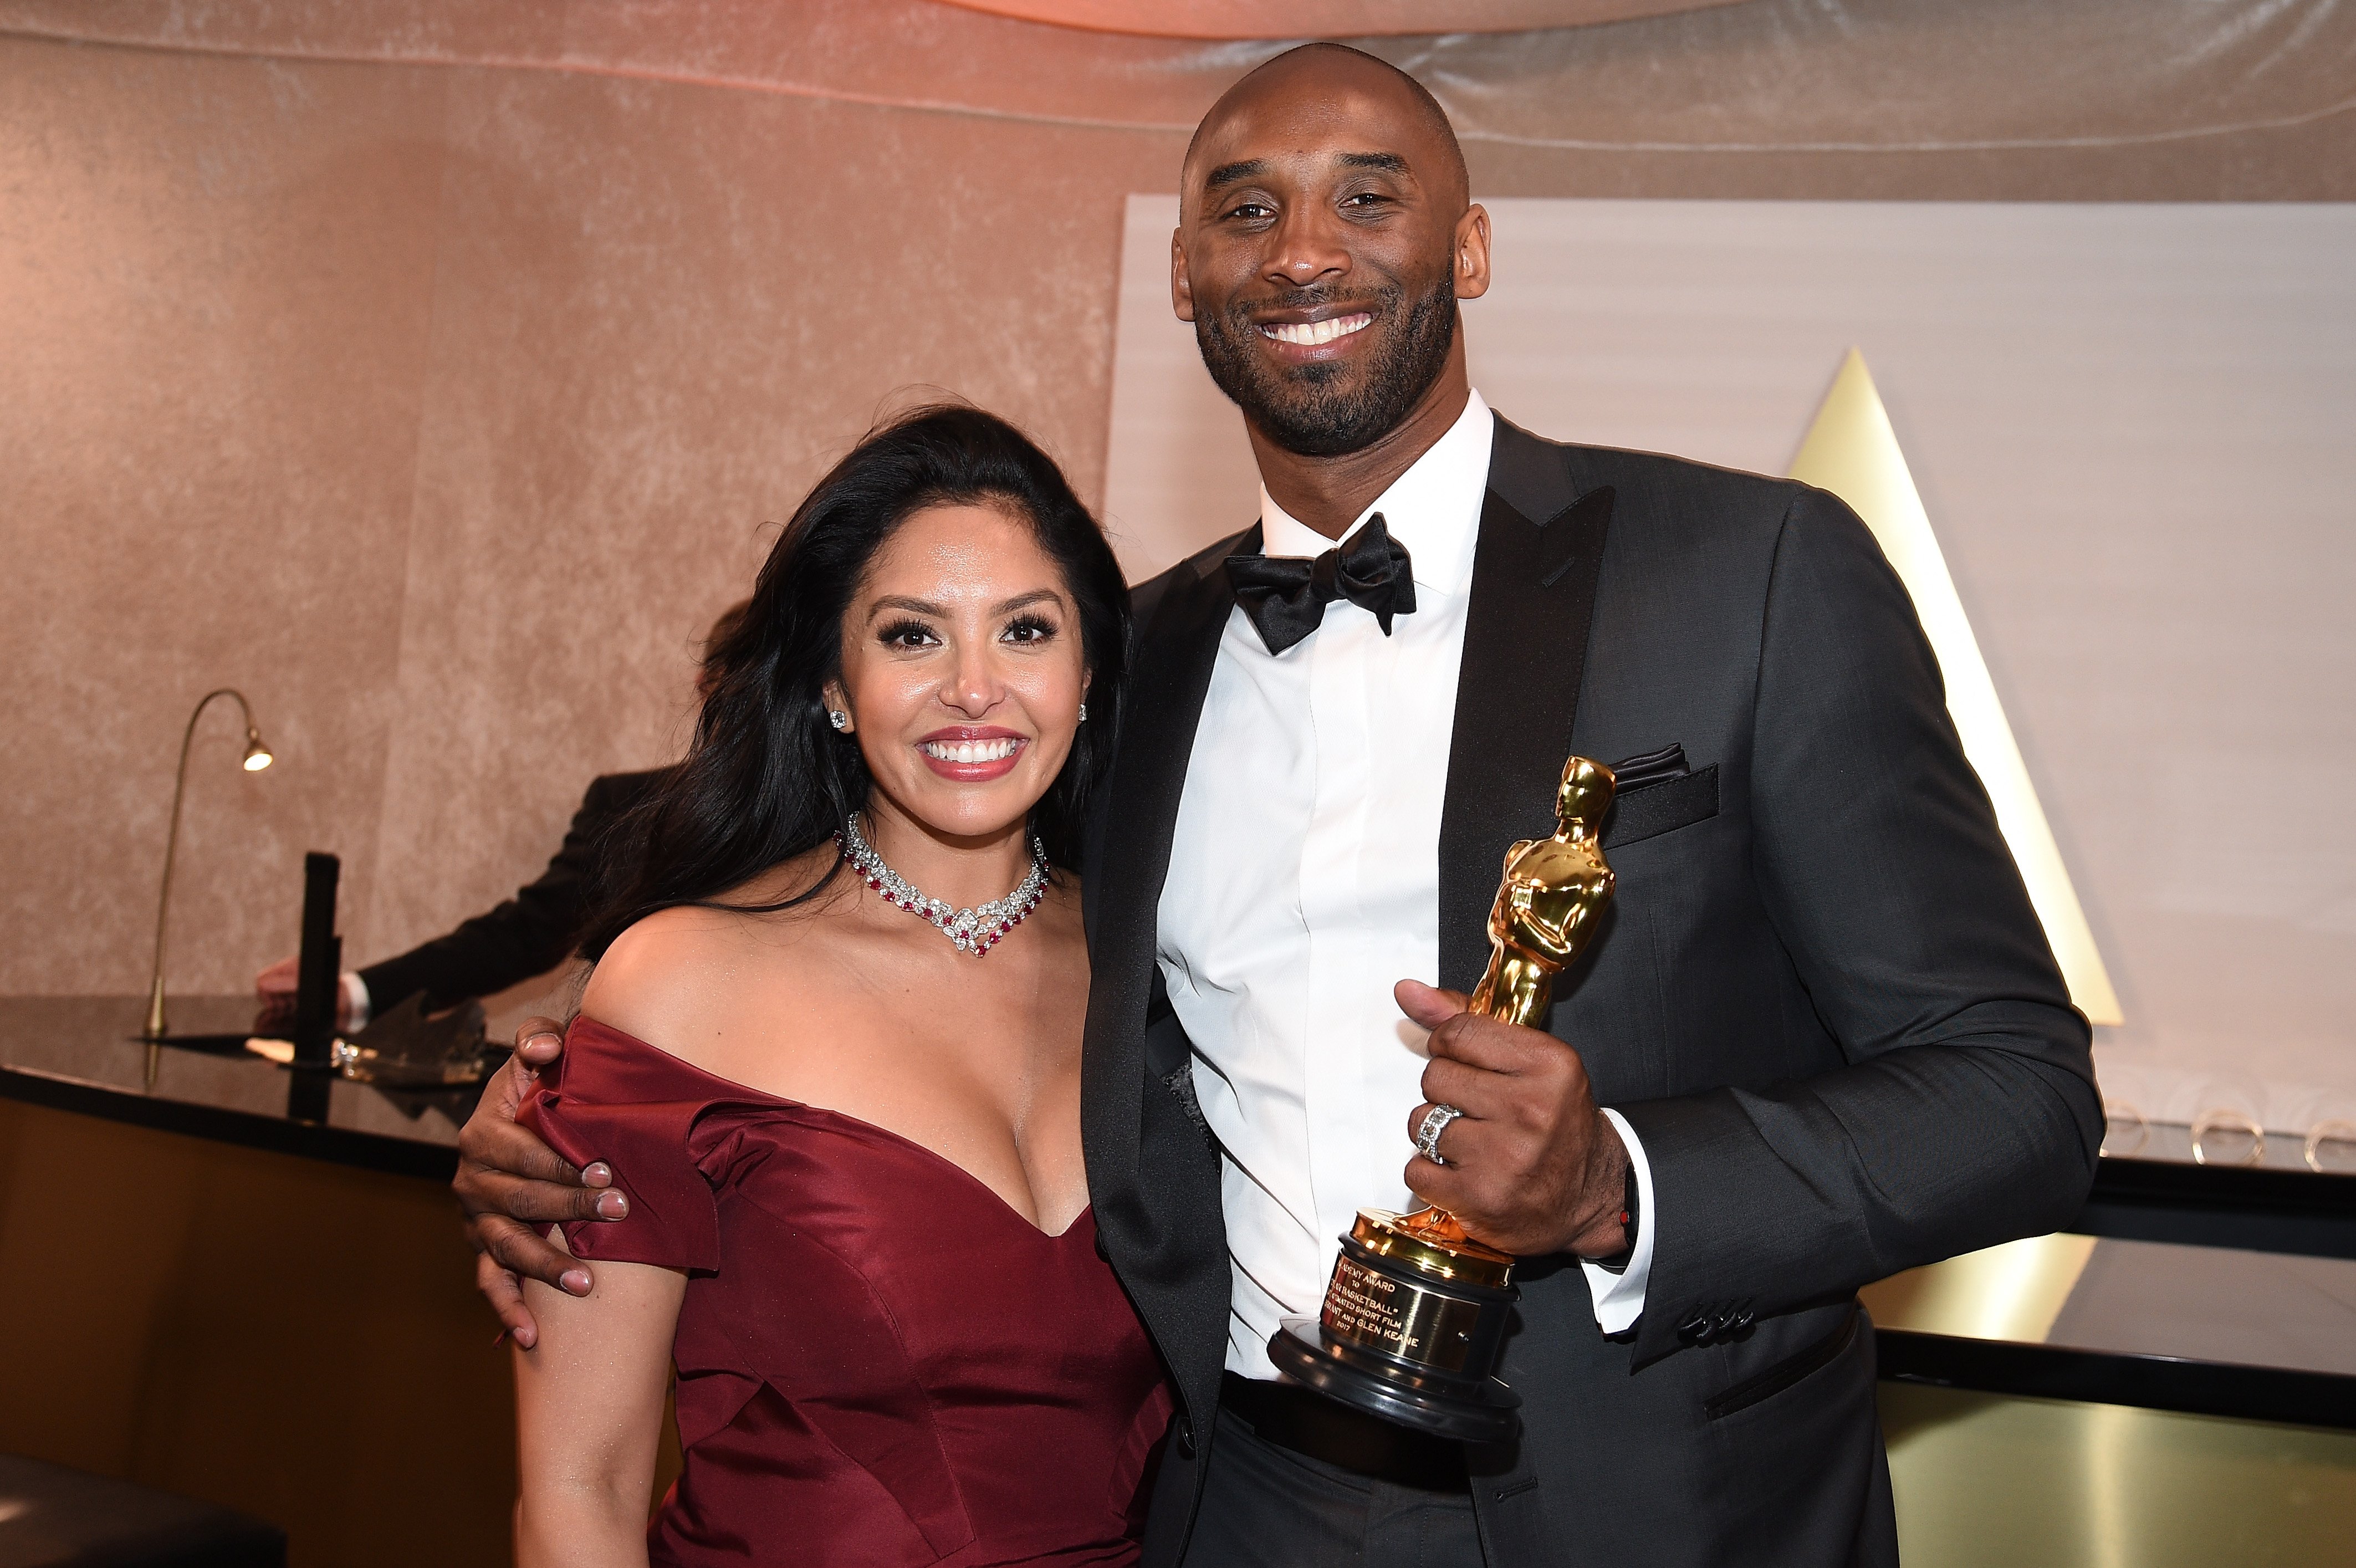 Kobe Bryant & Vanessa Laine Bryant at the 90th Annual Academy Awards Governors Ball on March 4, 2018 in California | Photo: Getty Images